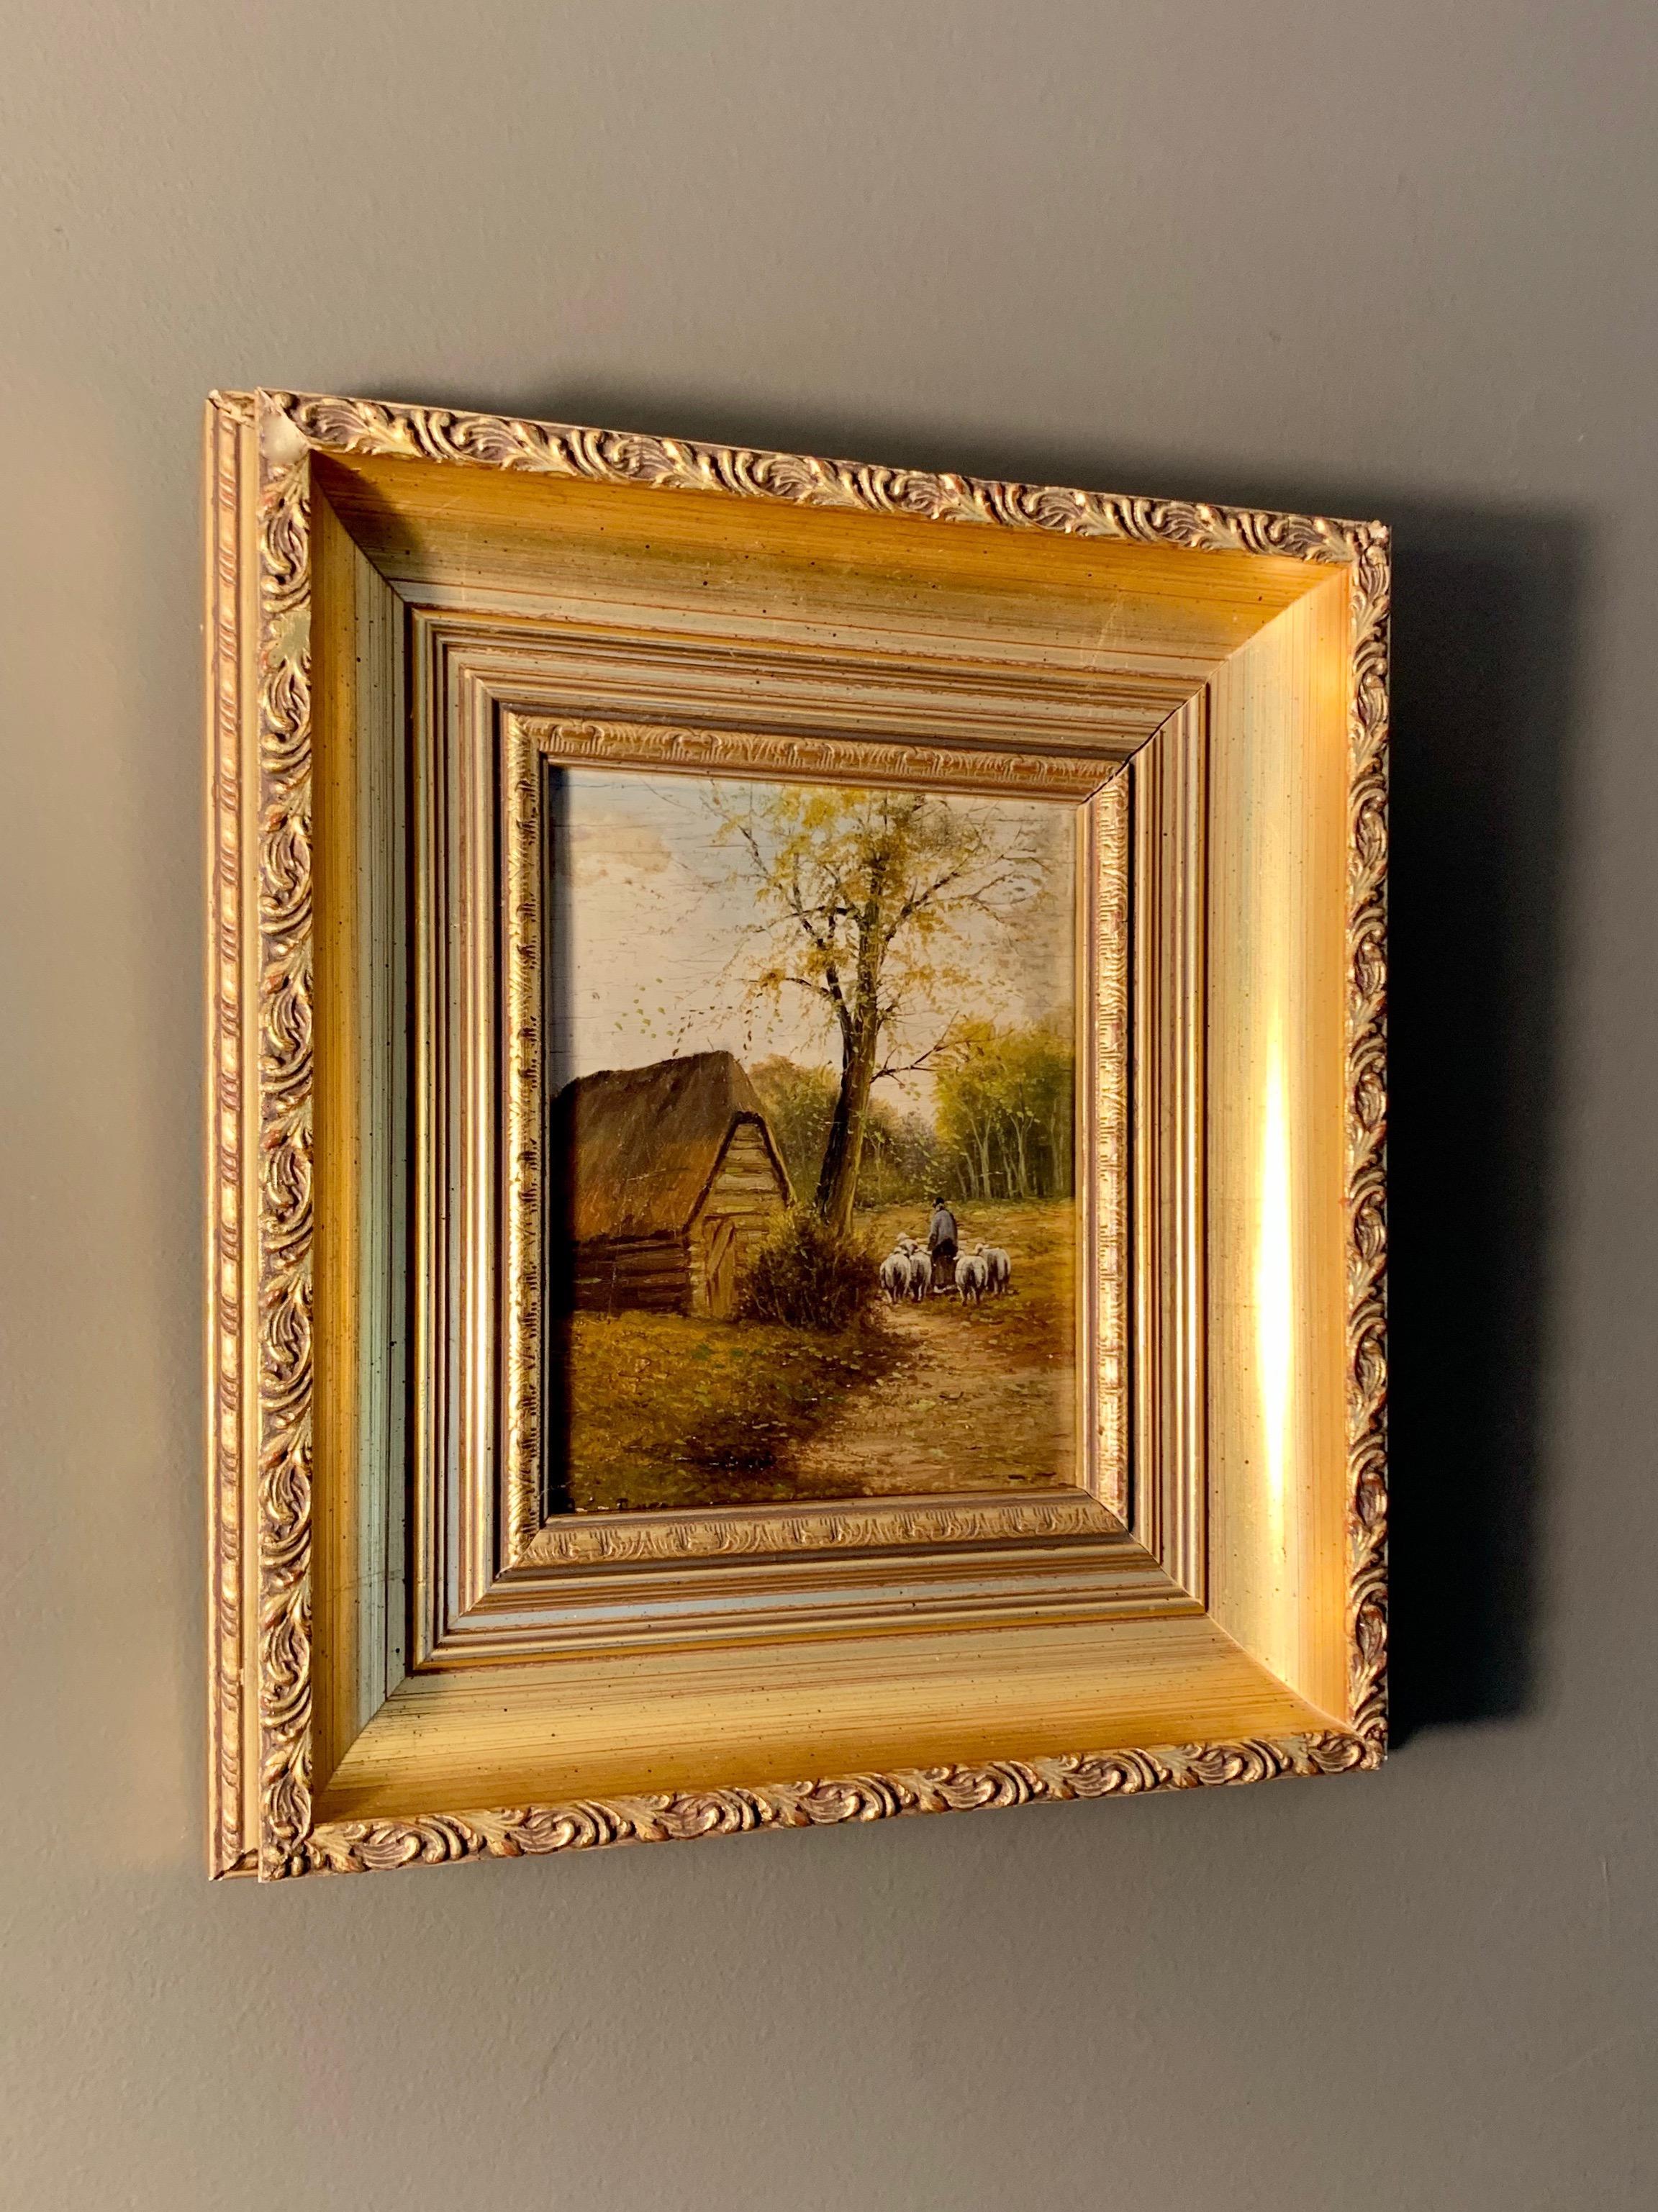 Petite French Barbizon school painting showing a shepherd guiding his herd in a wooded landscape. This peaceful little painting is housed in a matching gild frame from the period.